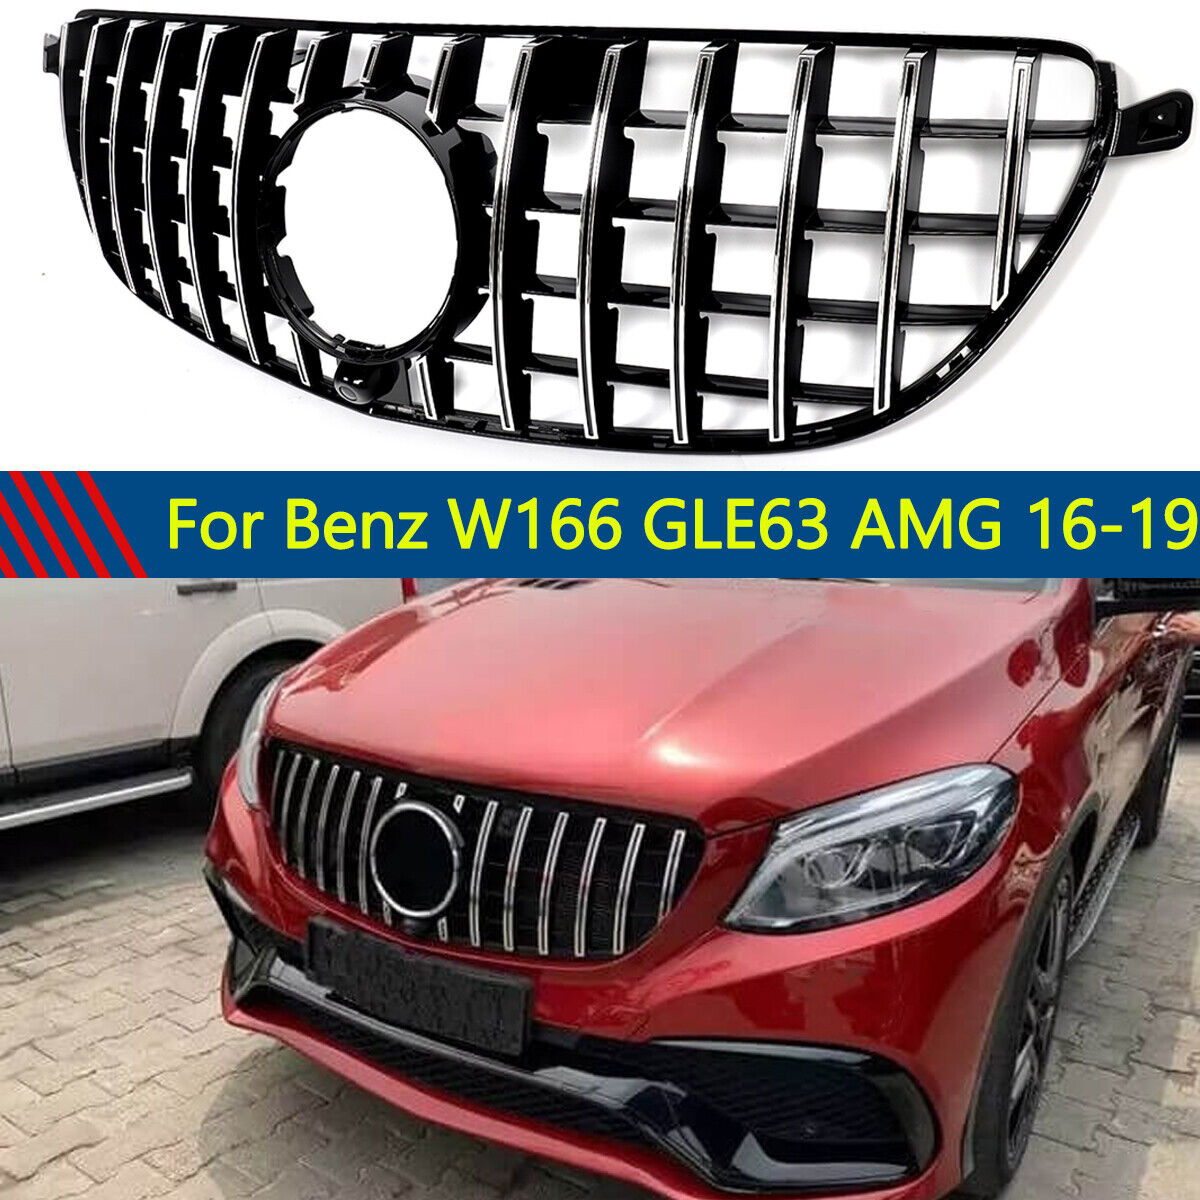 GTR Front Bumper Grille Grill Fit For Mercedes Benz W166 GLE63 AMG 2016-2019